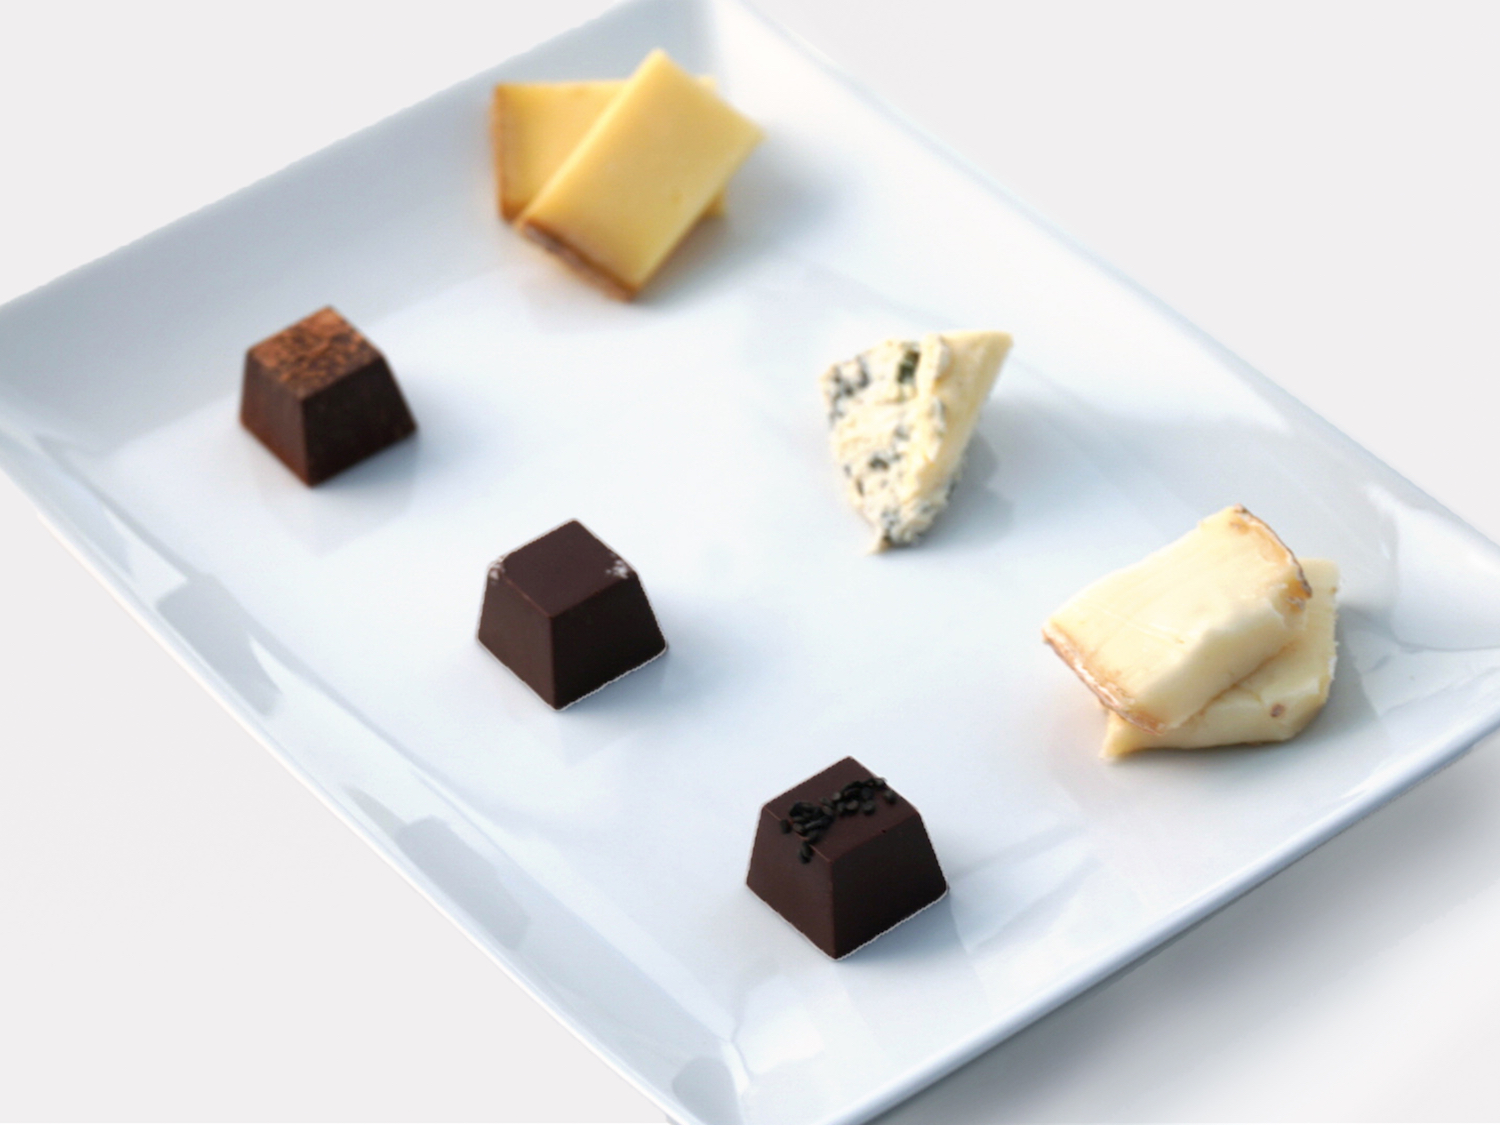 Artisanal Cheese and Chocolate Set from Cheese Grotto and Milène Jardine Chocolatier.